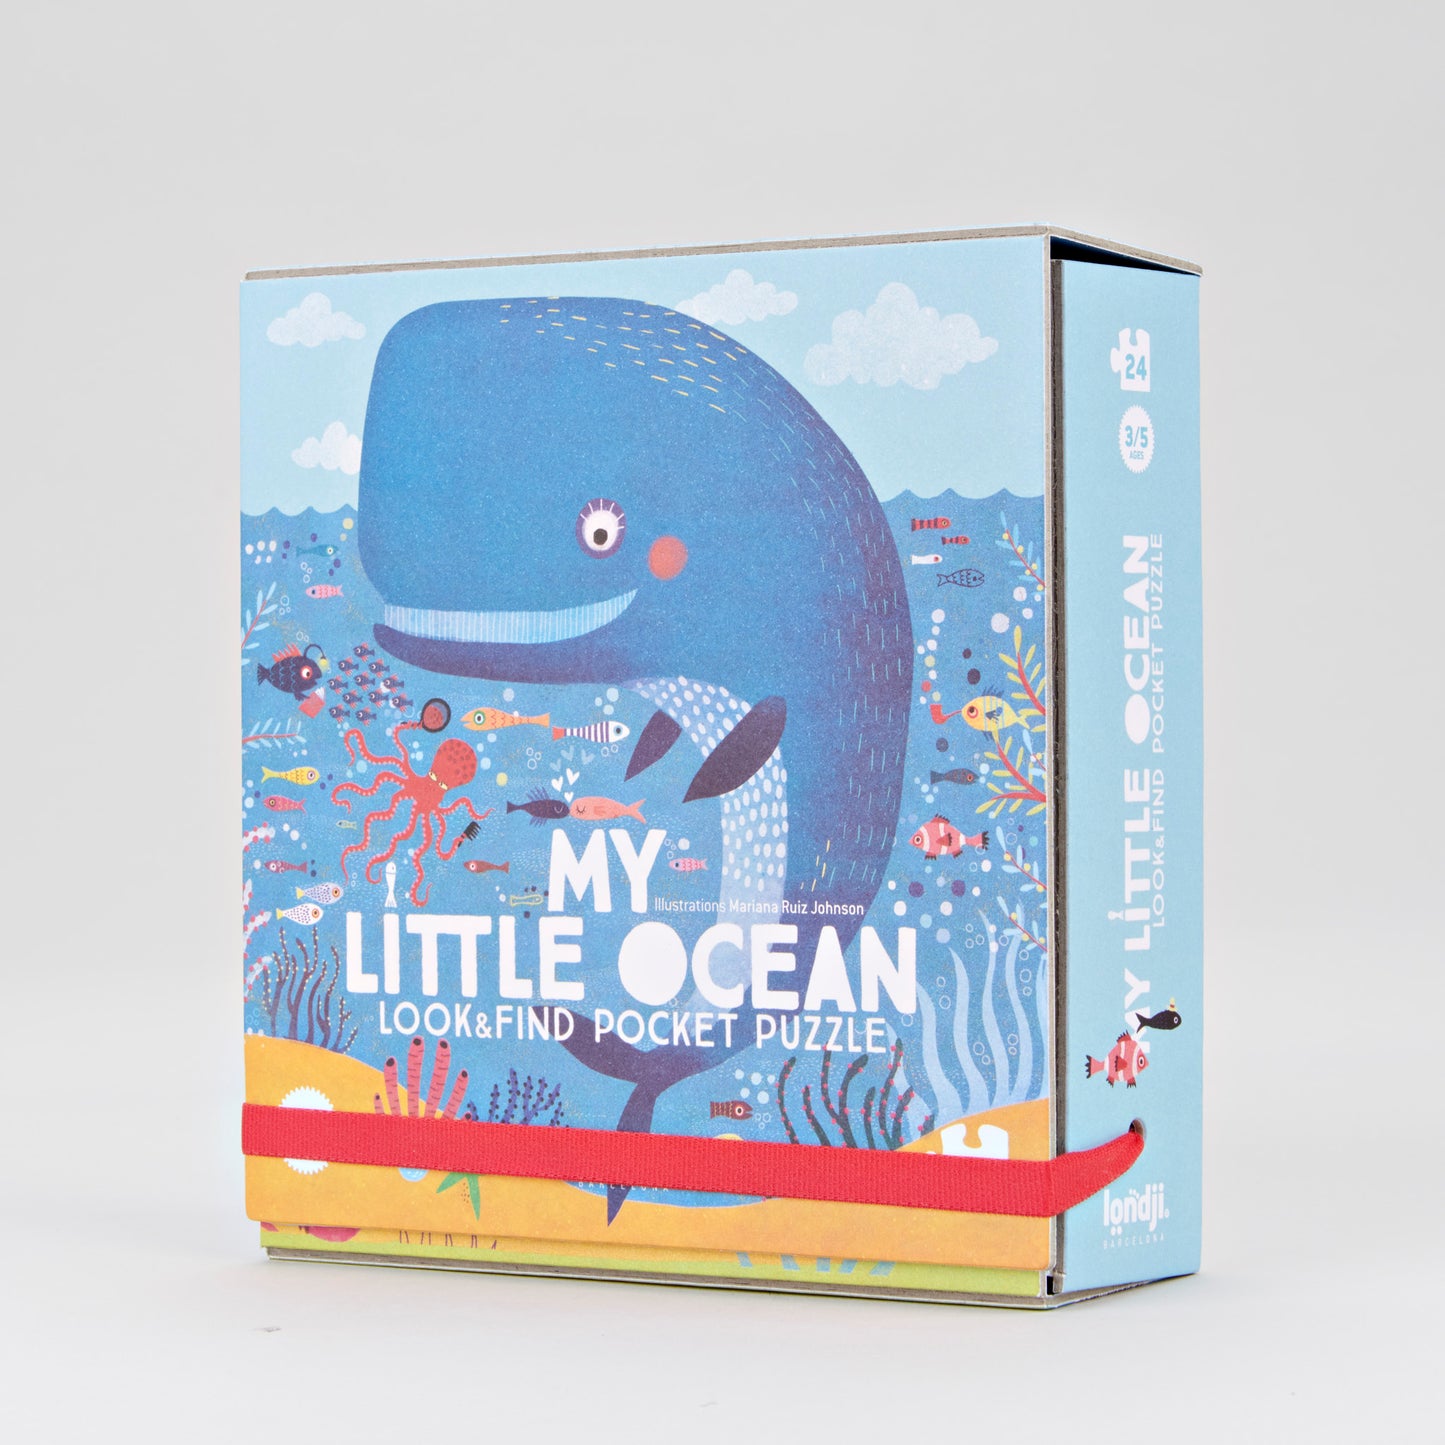 My Little Ocean - Look & Find Pocket Puzzle